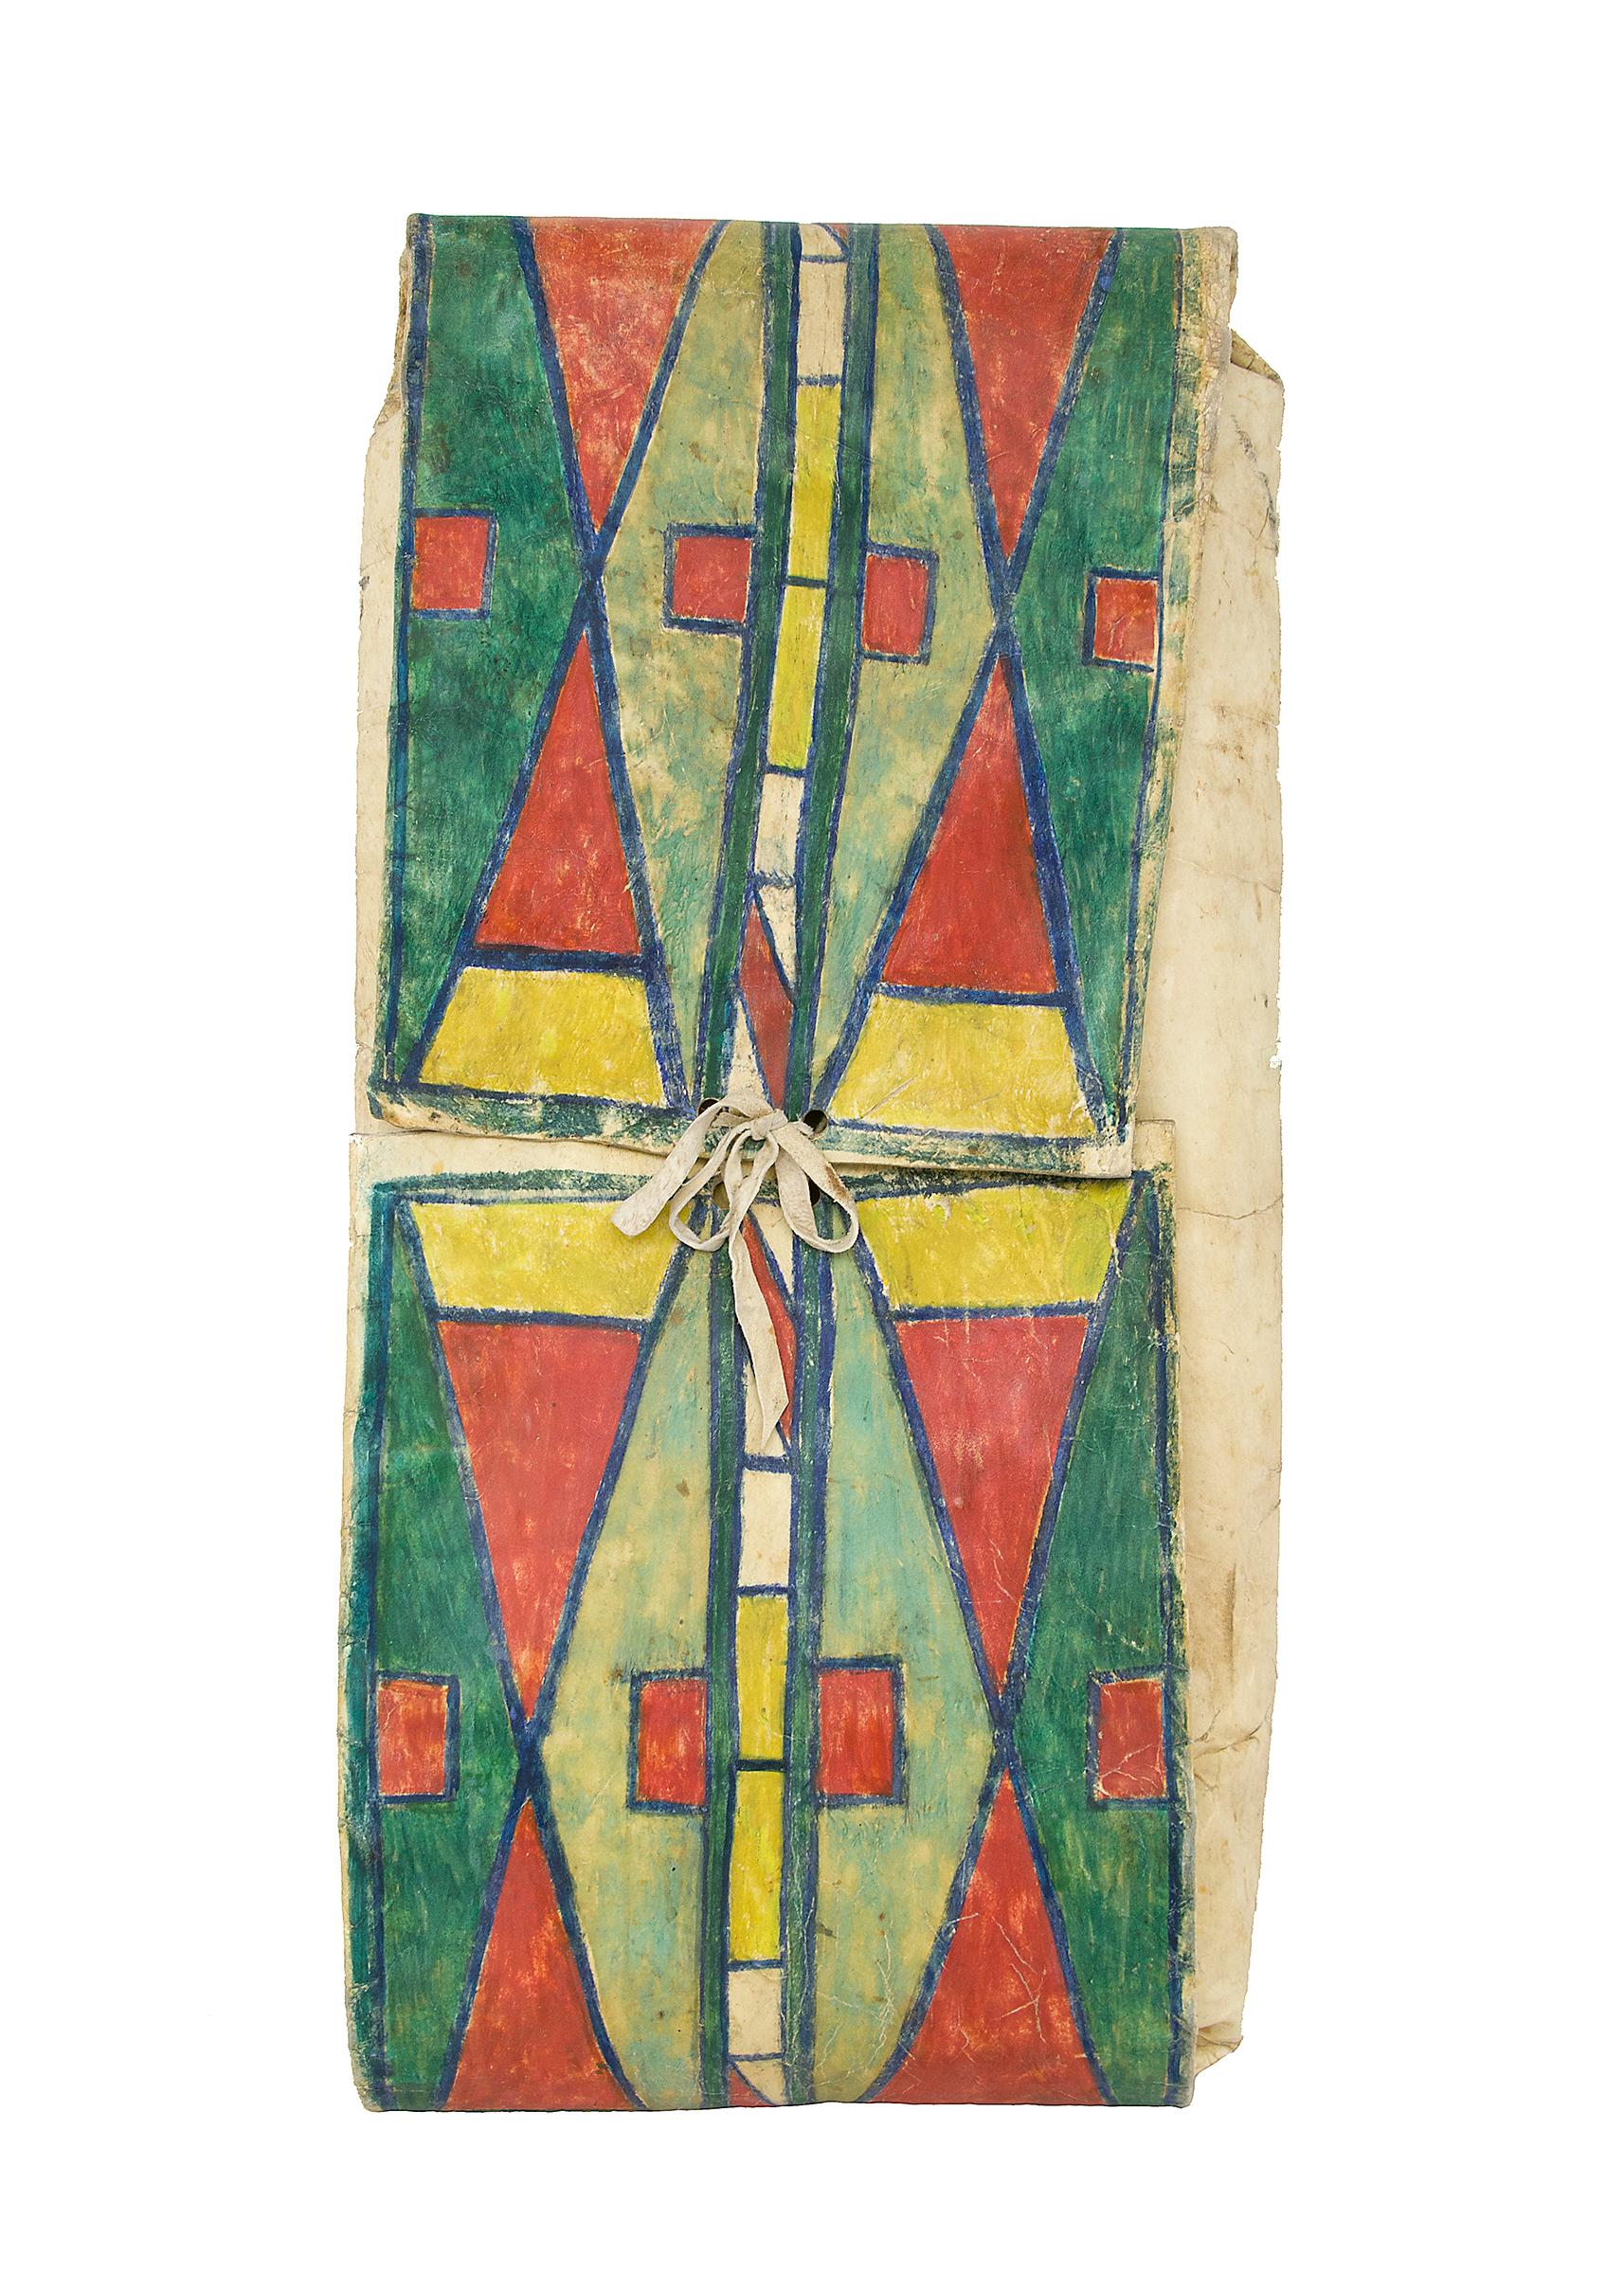 Vintage antique 19th century Native American Parfleche container in an envelope form, finely painted in colors of green, yellow and blue in an abstract geometric design by a Crow artist (North American Plains Indian). Makes a stunning Abstract